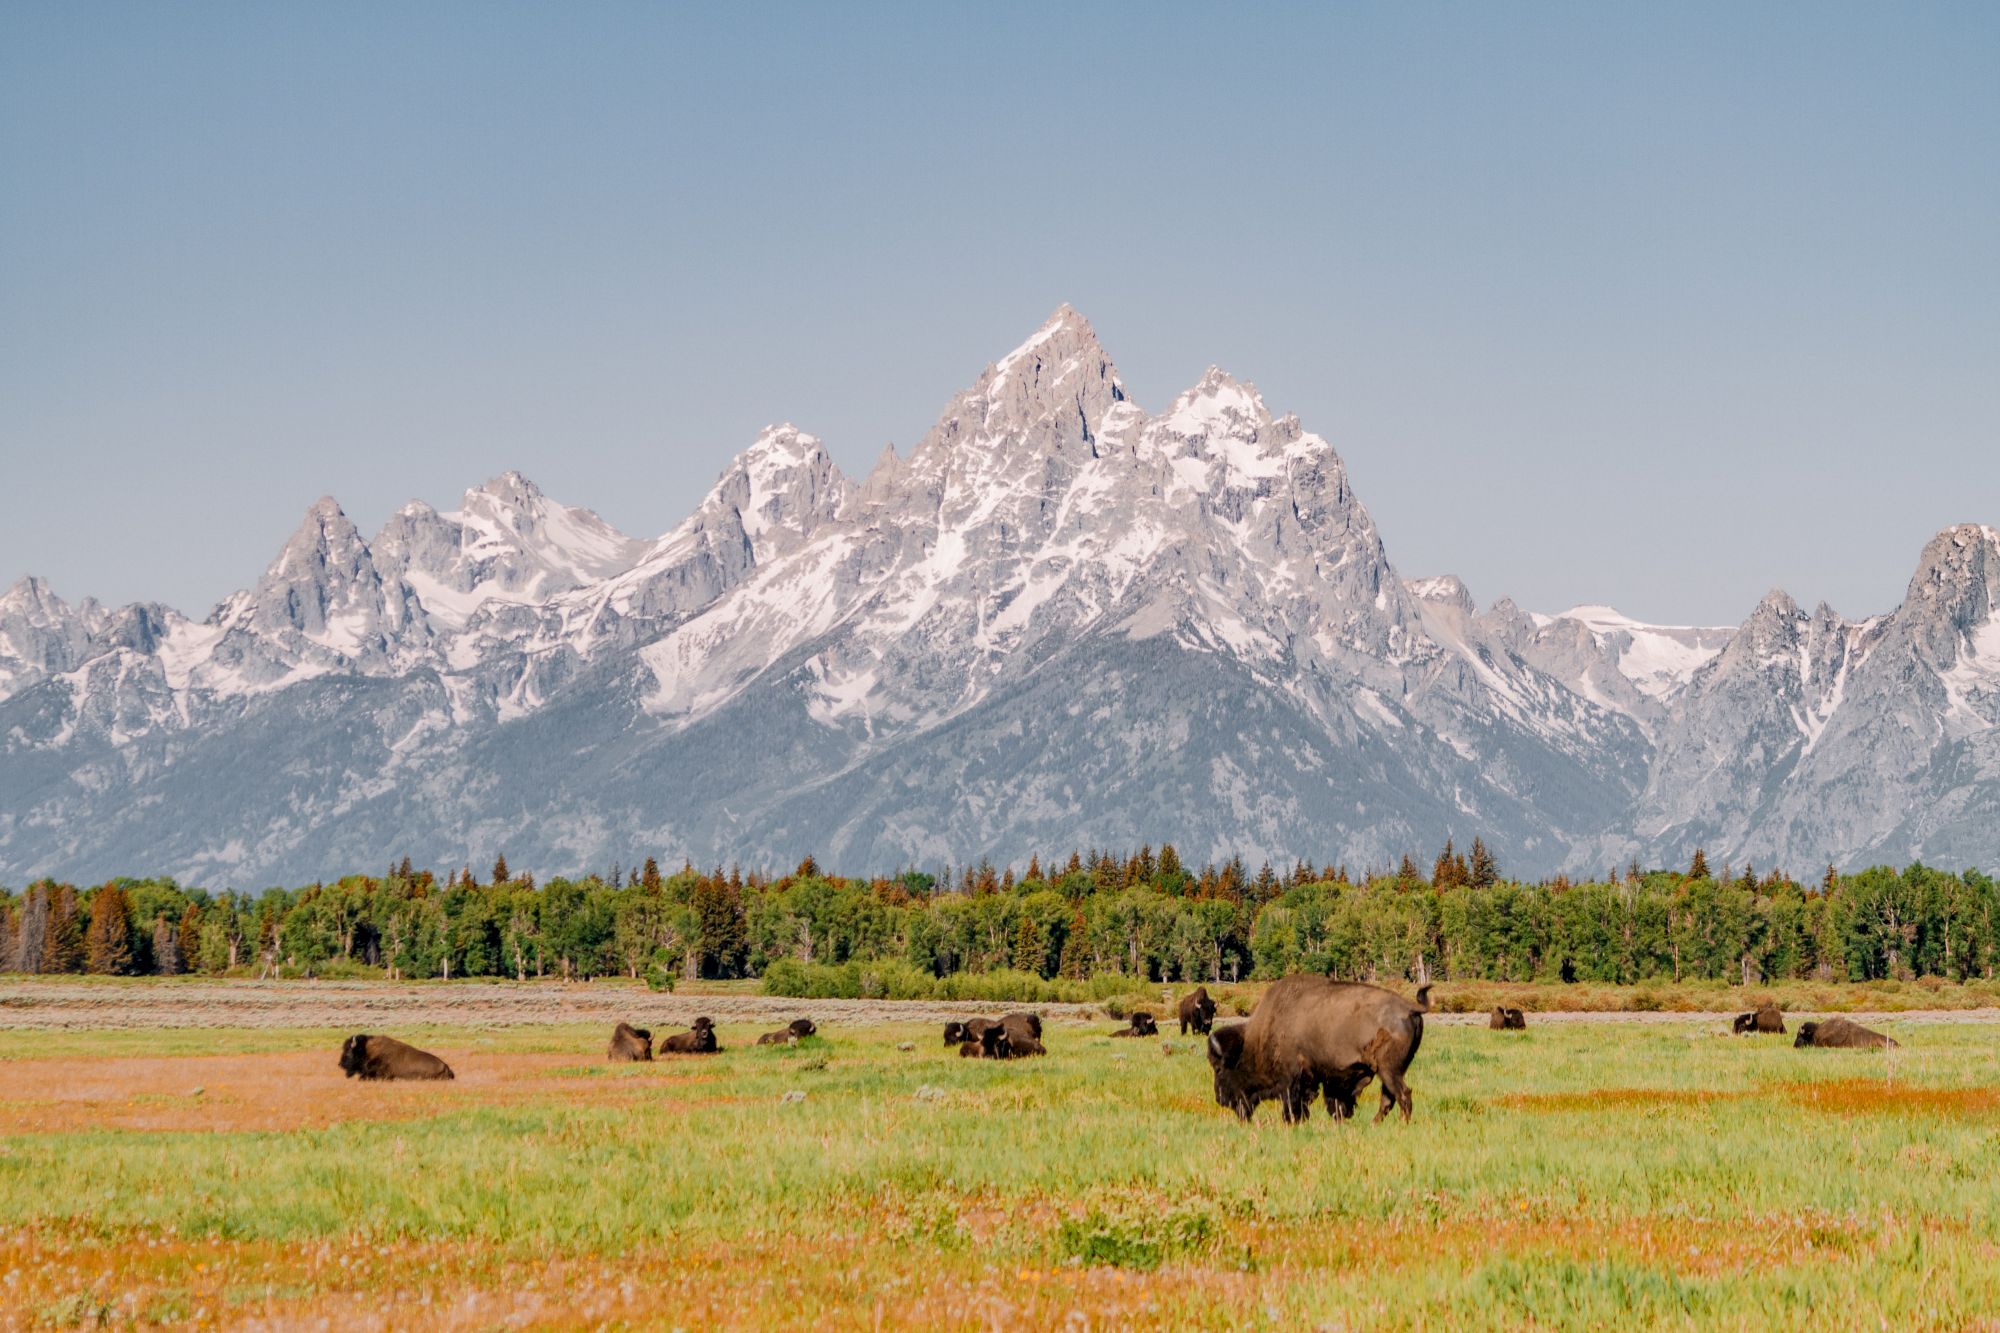 The image shows a herd of bison grazing on a green field with snow-capped mountains and a clear blue sky in the background.